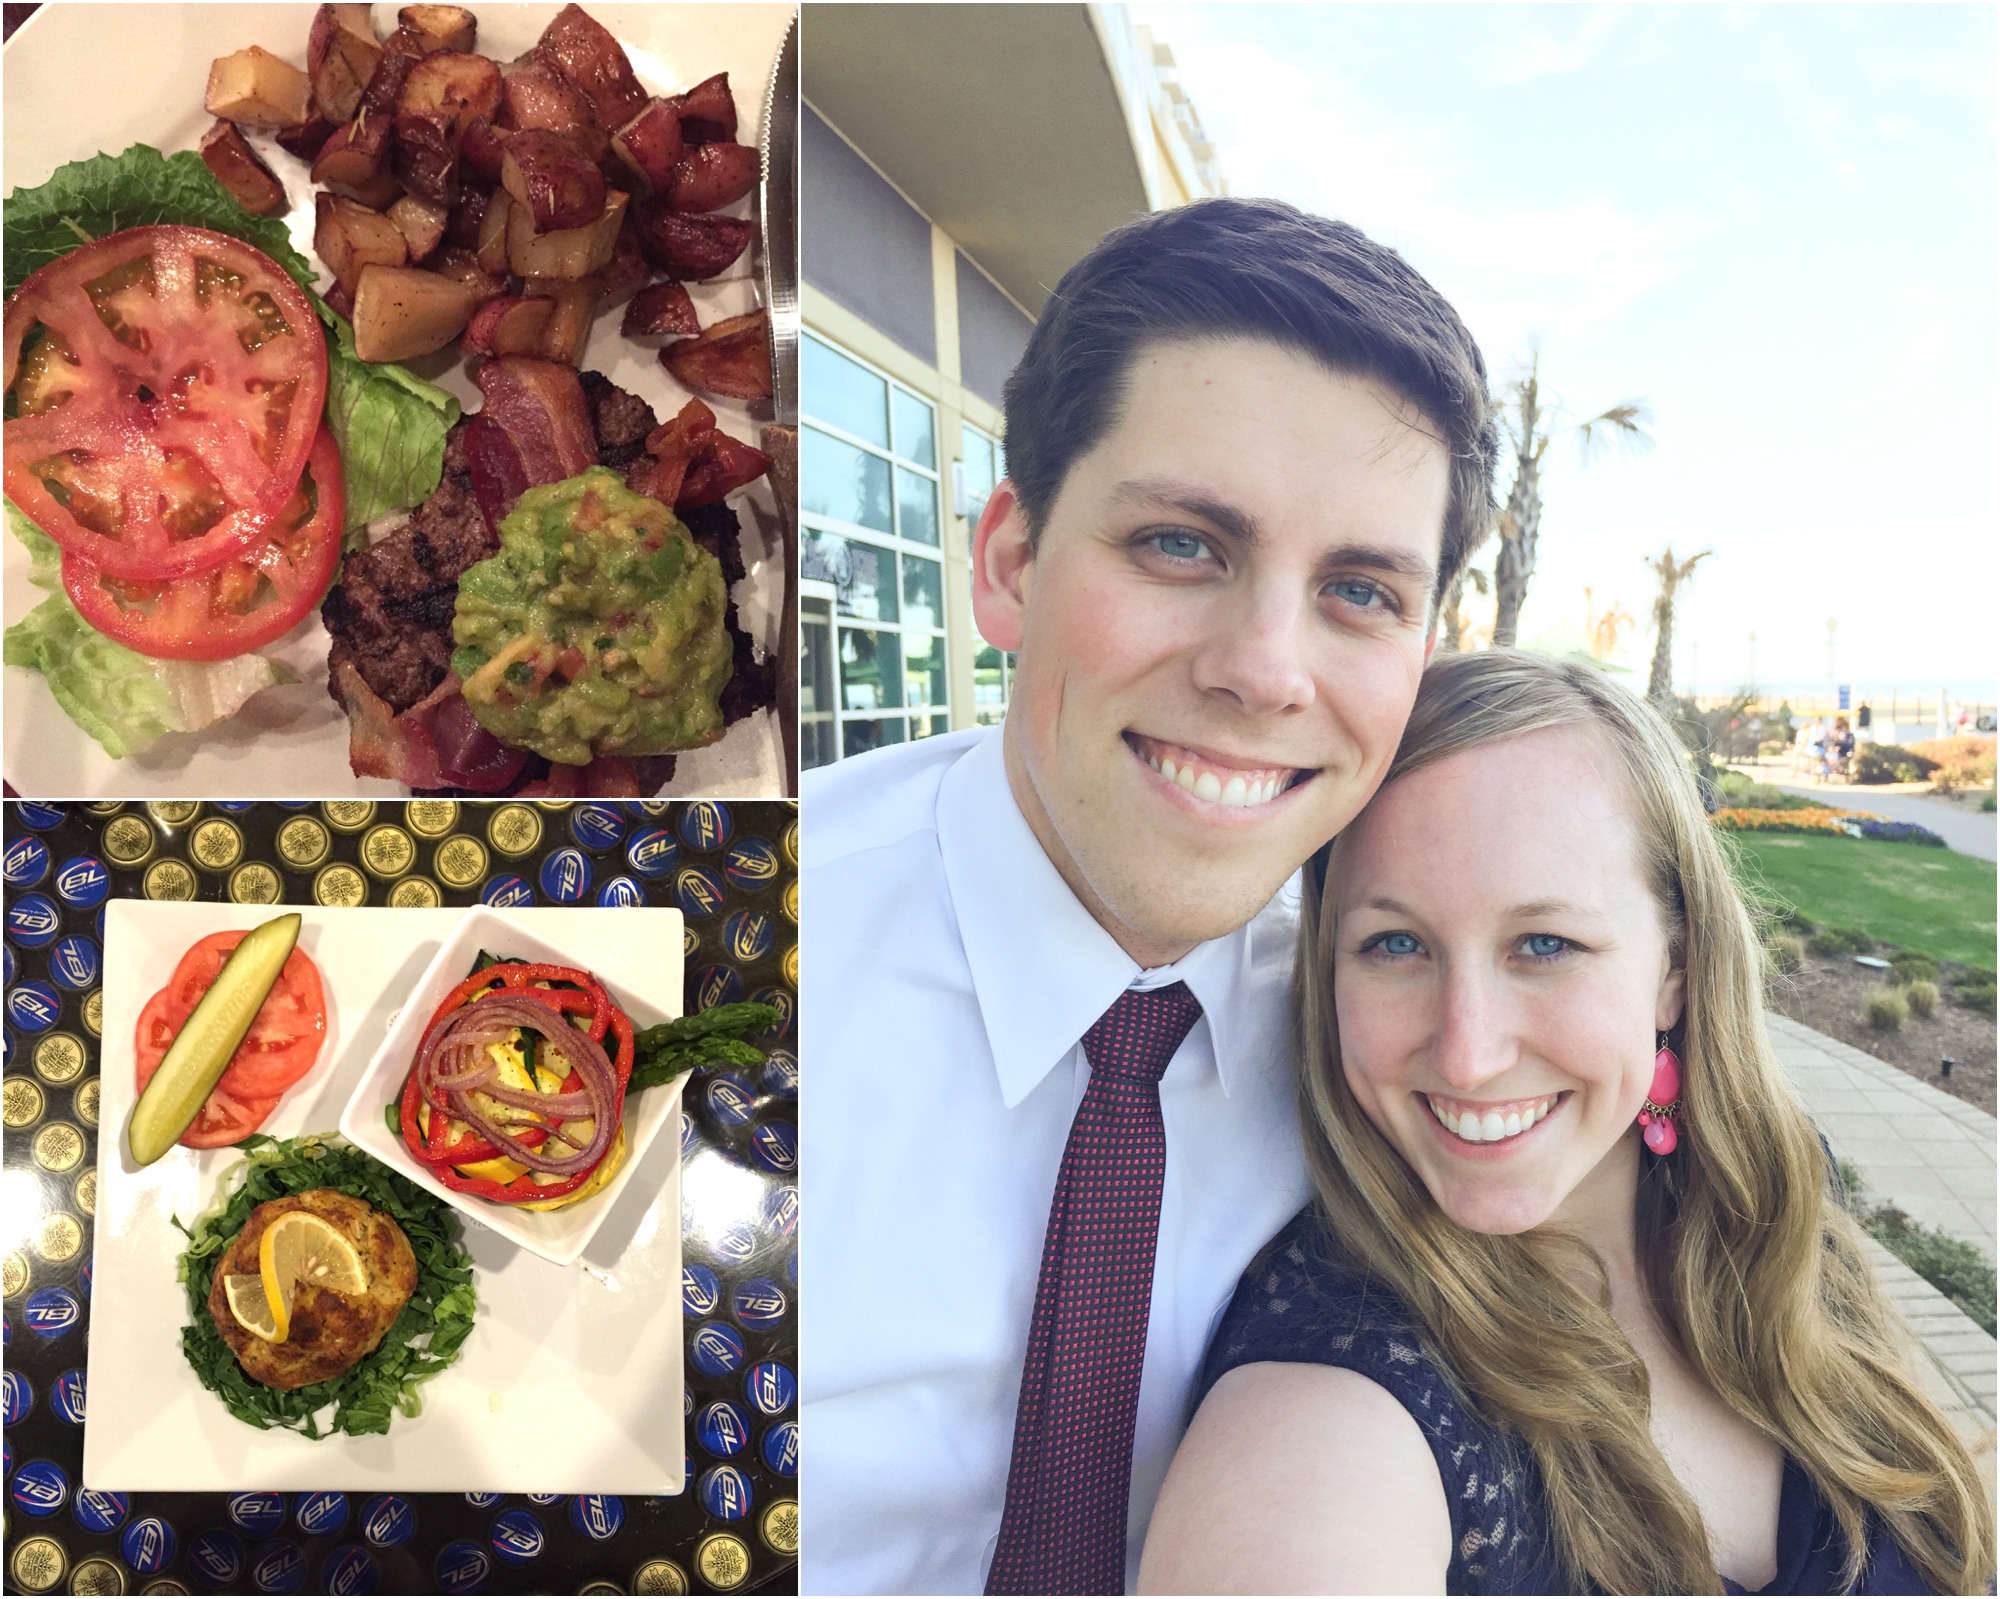  Week 3 we shot a wedding in VA Beach and I planned ahead! I brought a cooler with hard boiled eggs, water bottles, homemade salad dressing, fruit, and veggies. When we went out to eat, I ordered a burger with no bun or cheese and it was delicious!&n